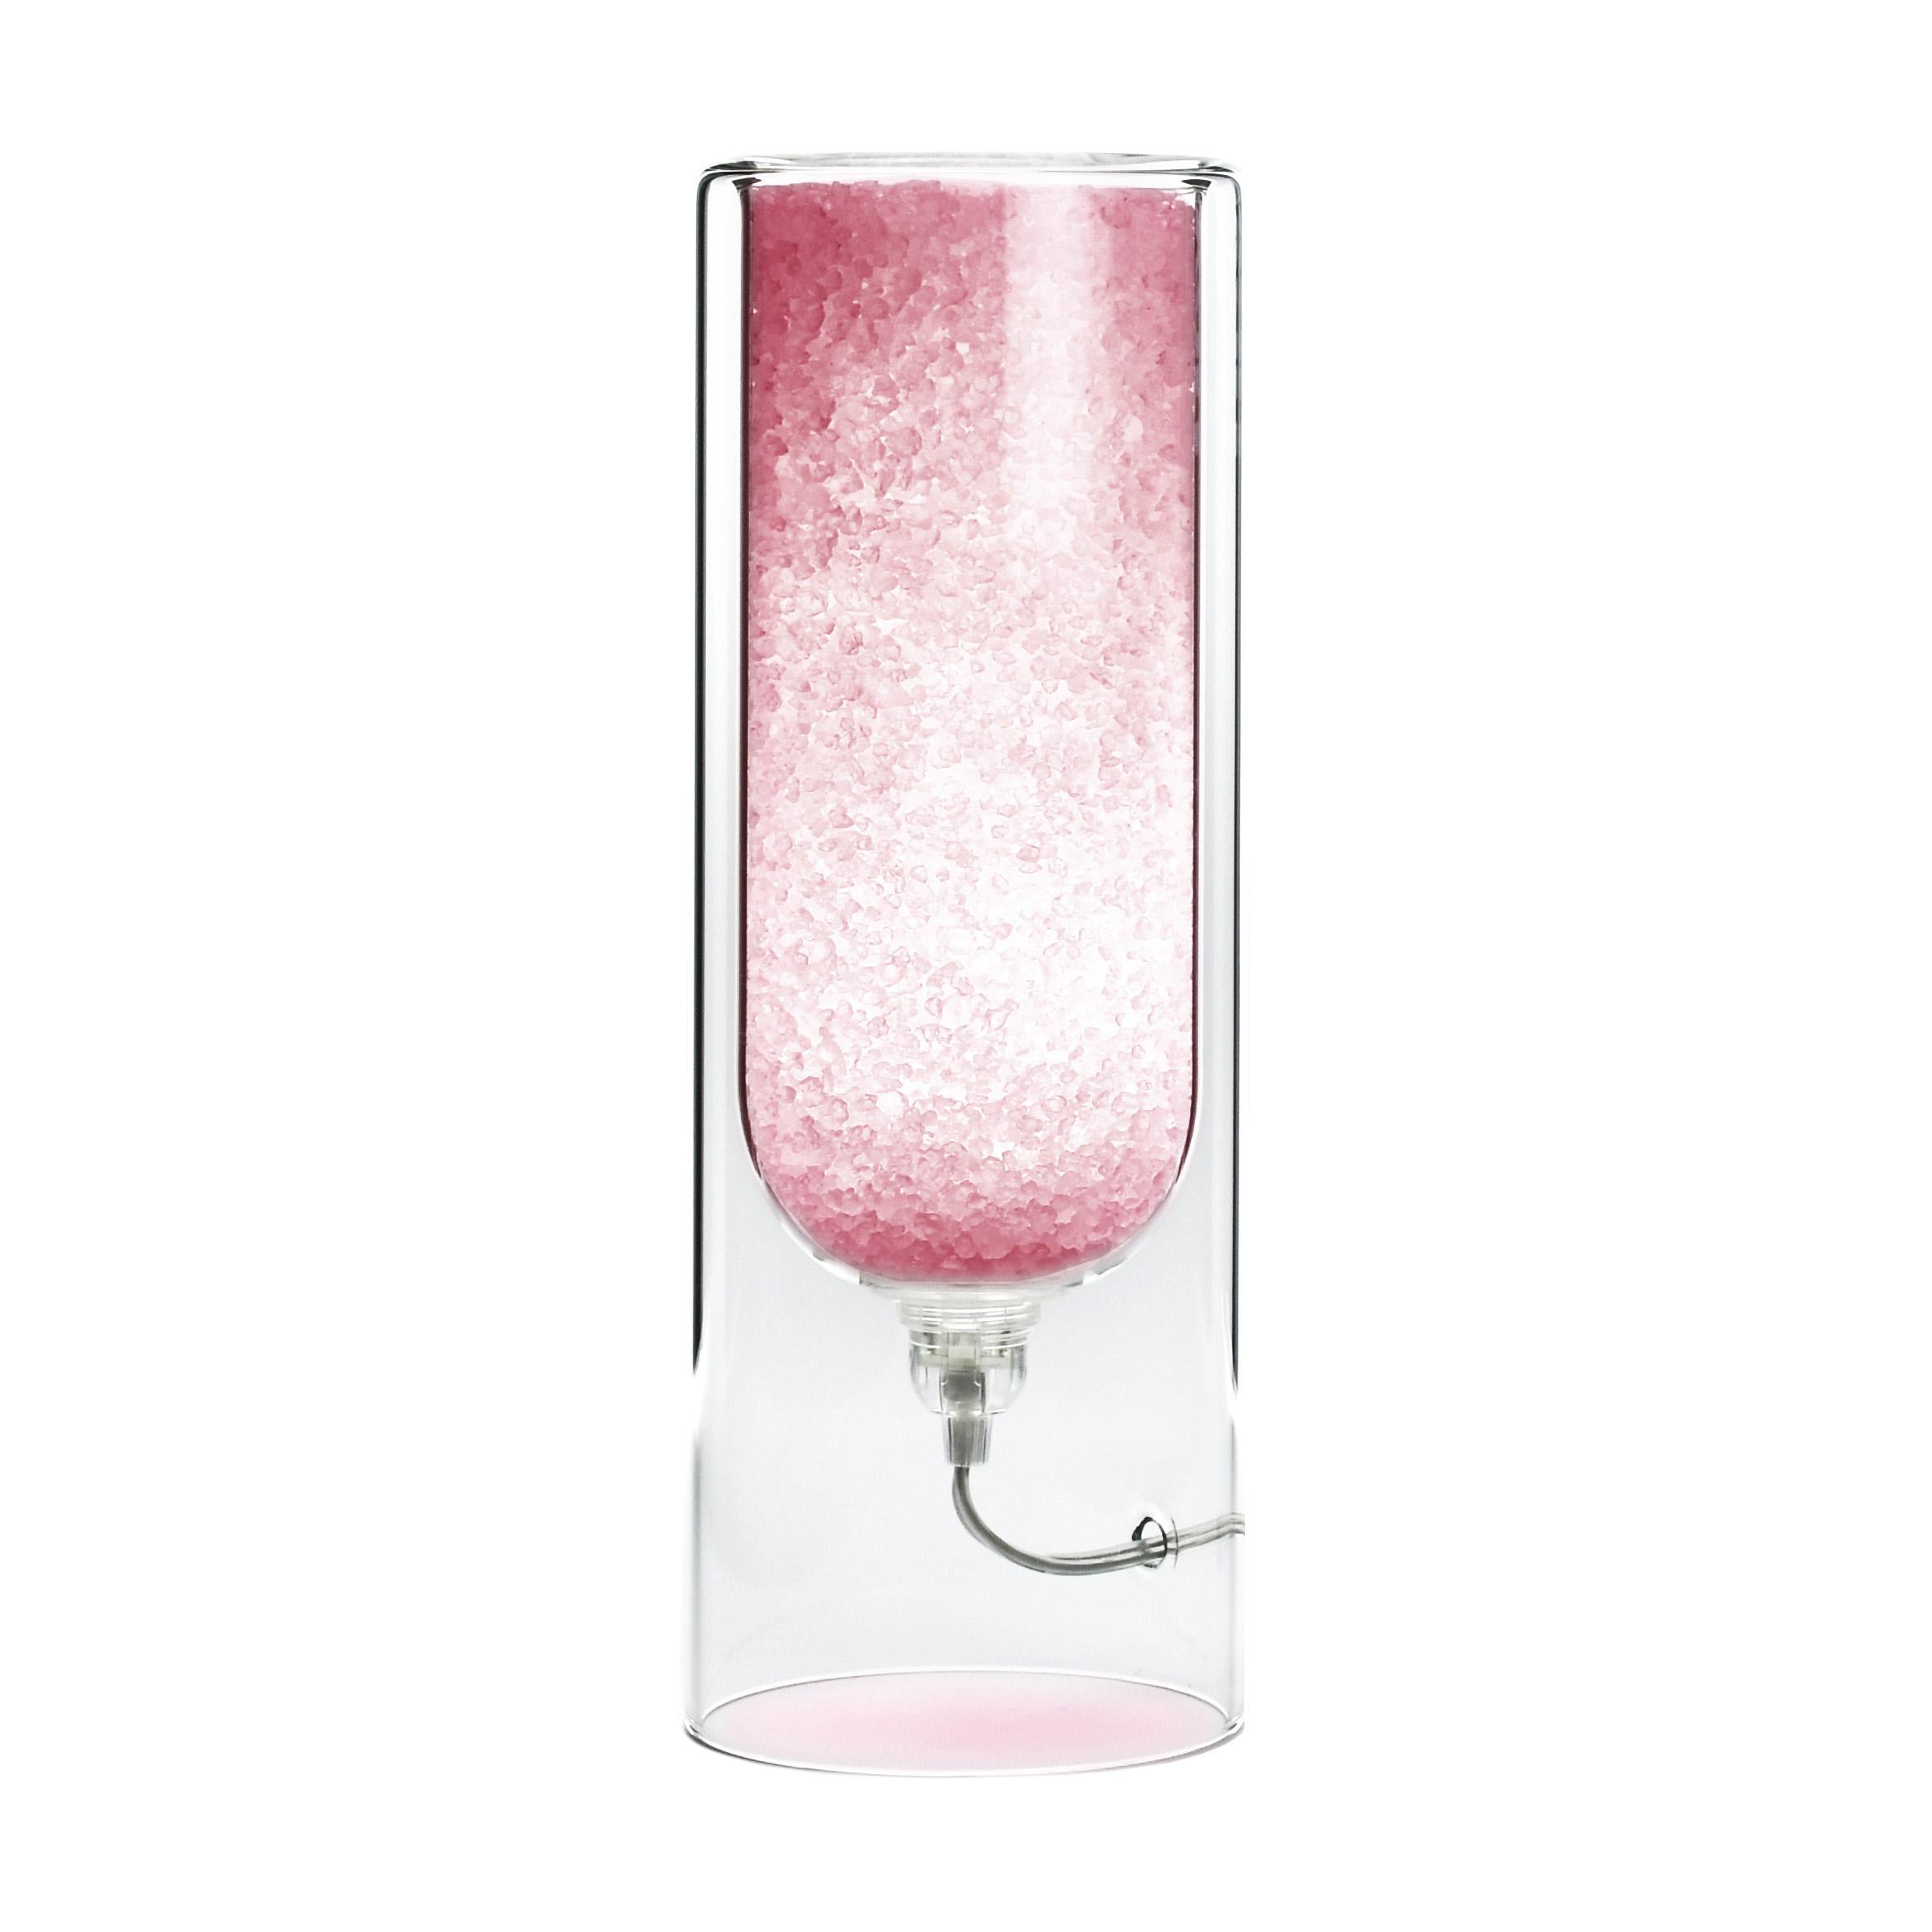 Pink Rocklumìna XXS table lamp by Coki Barbieri.
Dimensions: W 12 x D 12 x H 33.5 cm.
Materials: Italian rock salt crystals colored with natural pigments, mineral pigments from Italian soil and borosilicate glass.

All our lamps can be wired